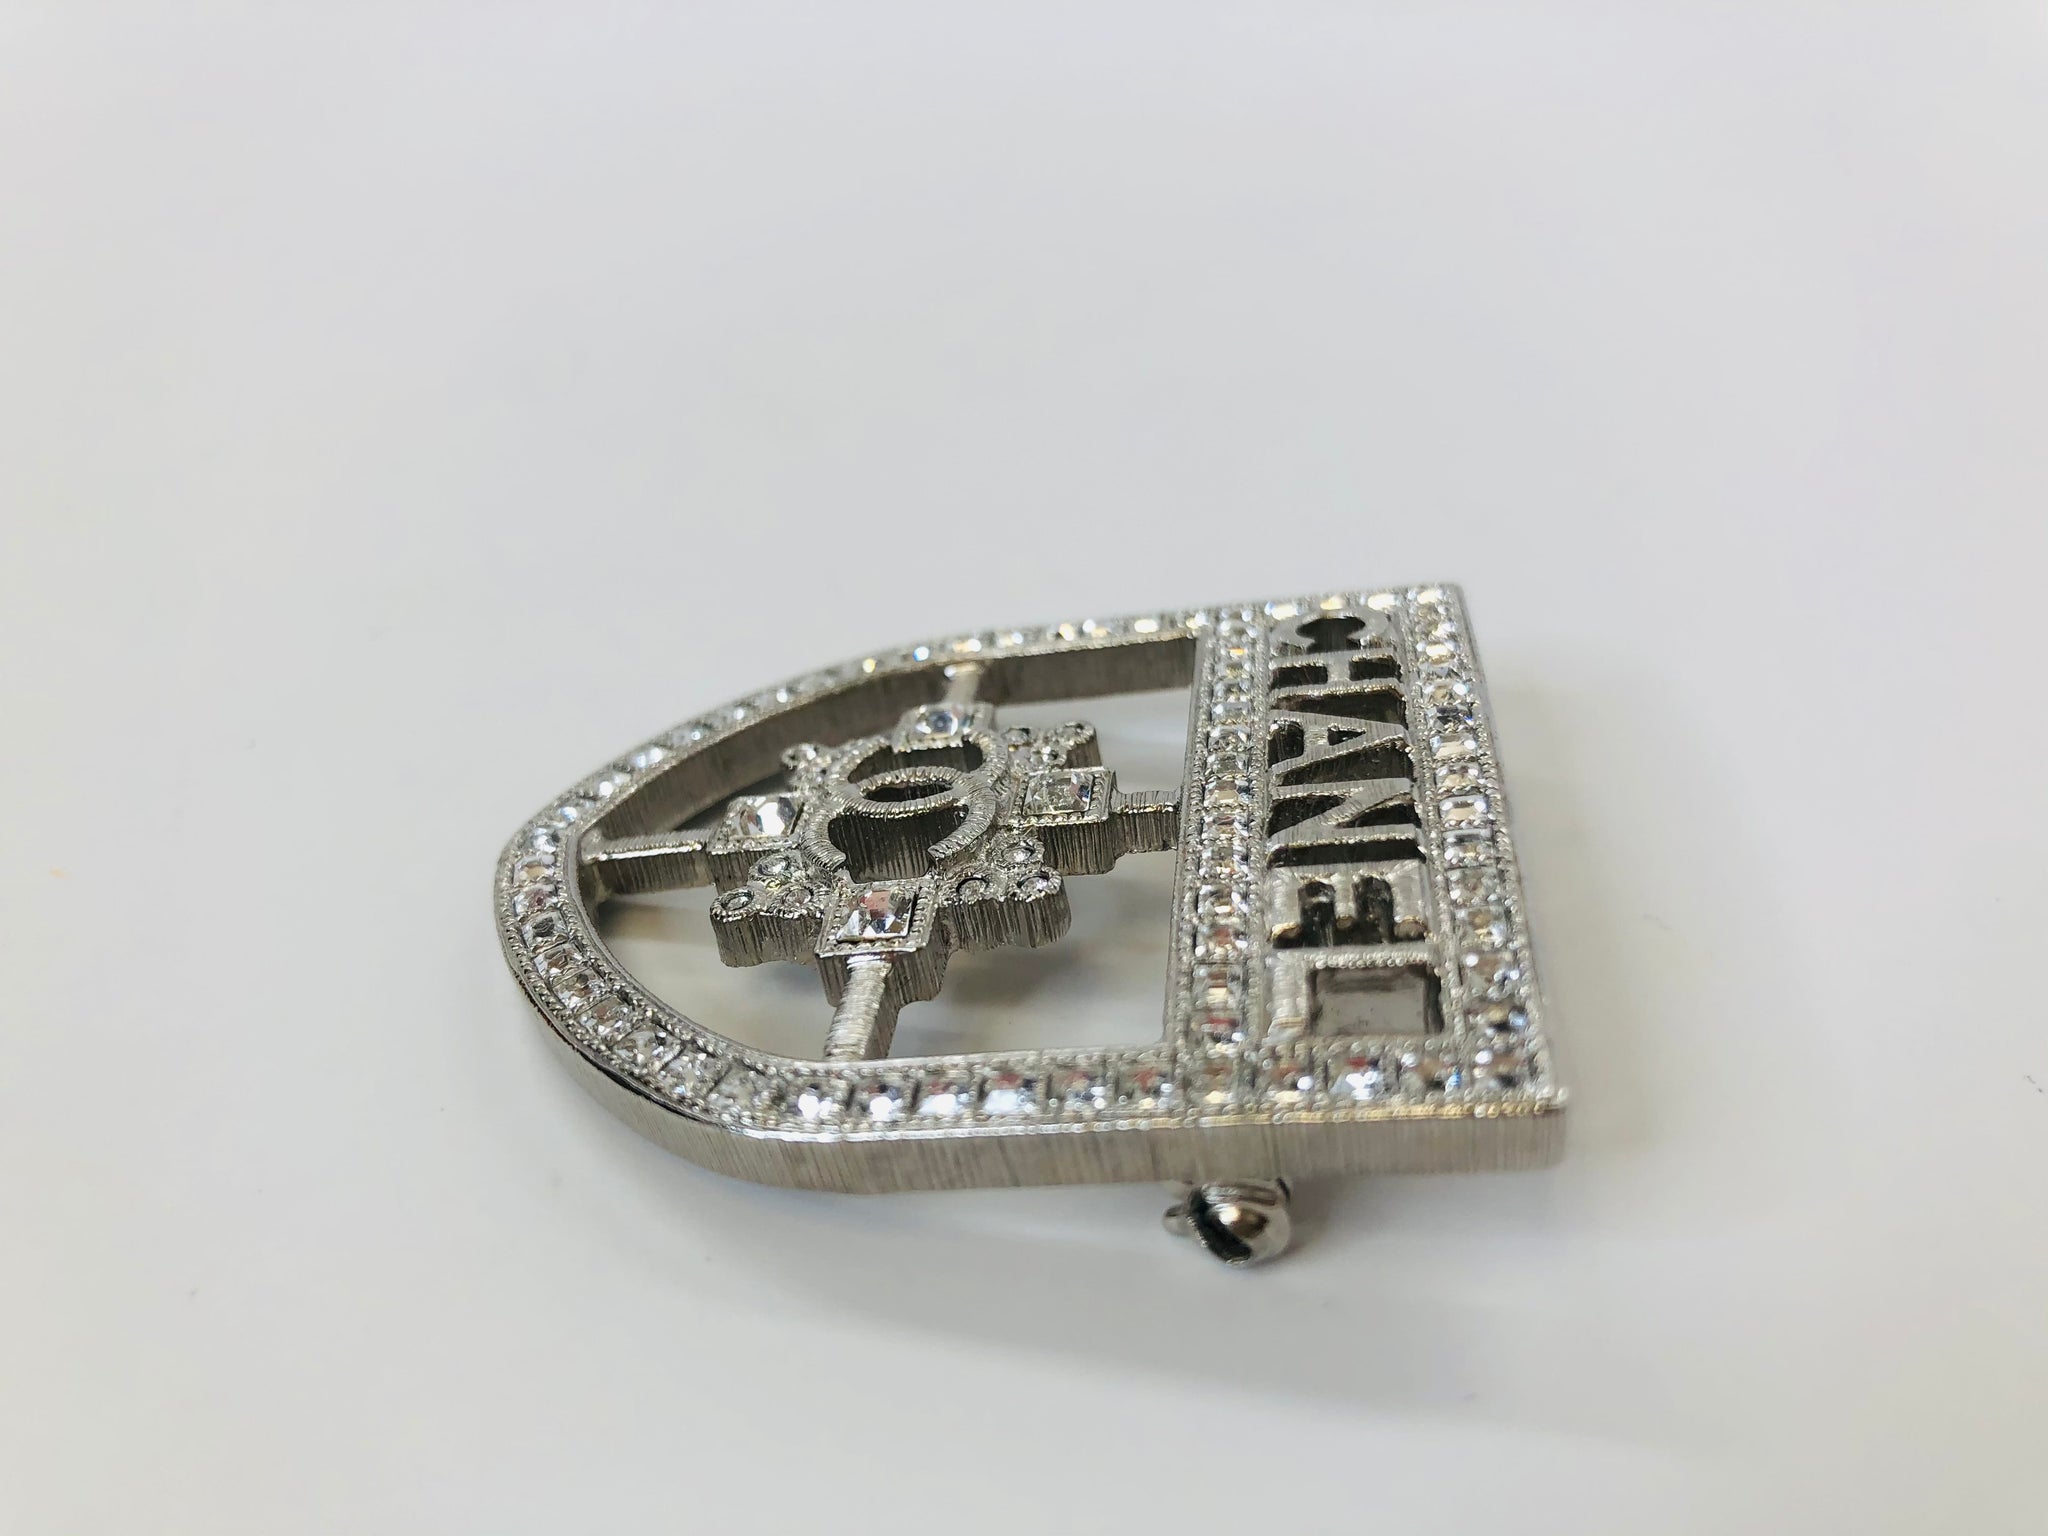 Chanel Crystal Bow Brooch Auction